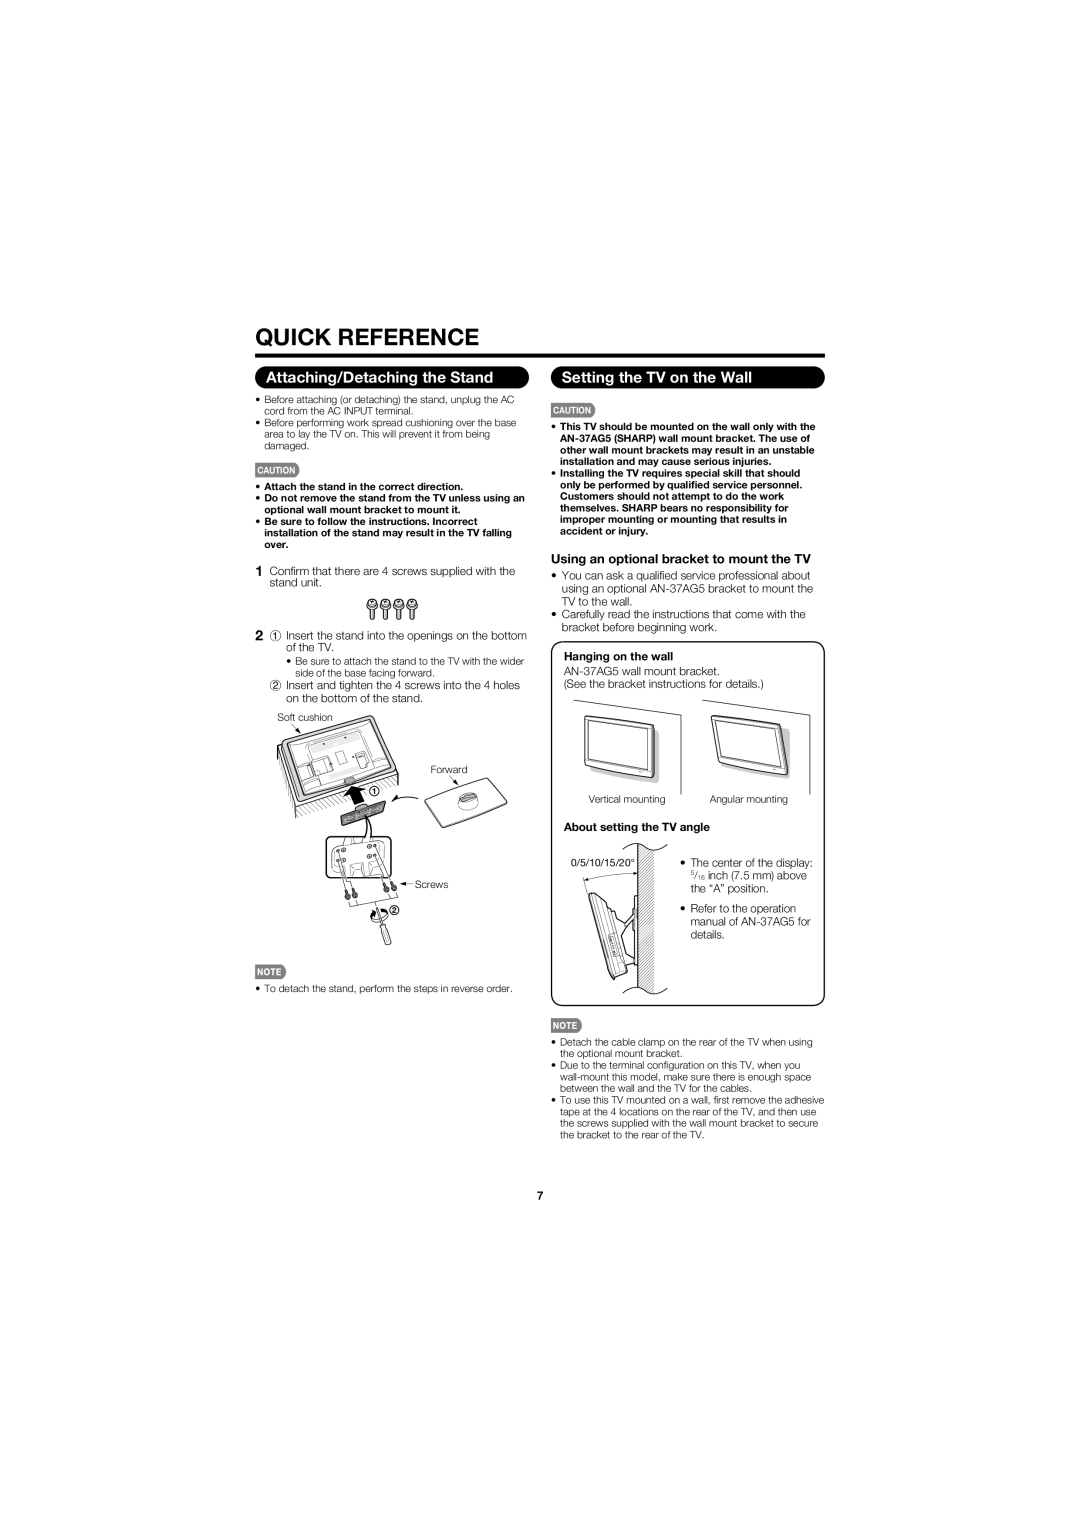 Sharp LC32D47UT Quick Reference, Attaching/Detaching the Stand, Setting the TV on the Wall, Hanging on the wall, details 